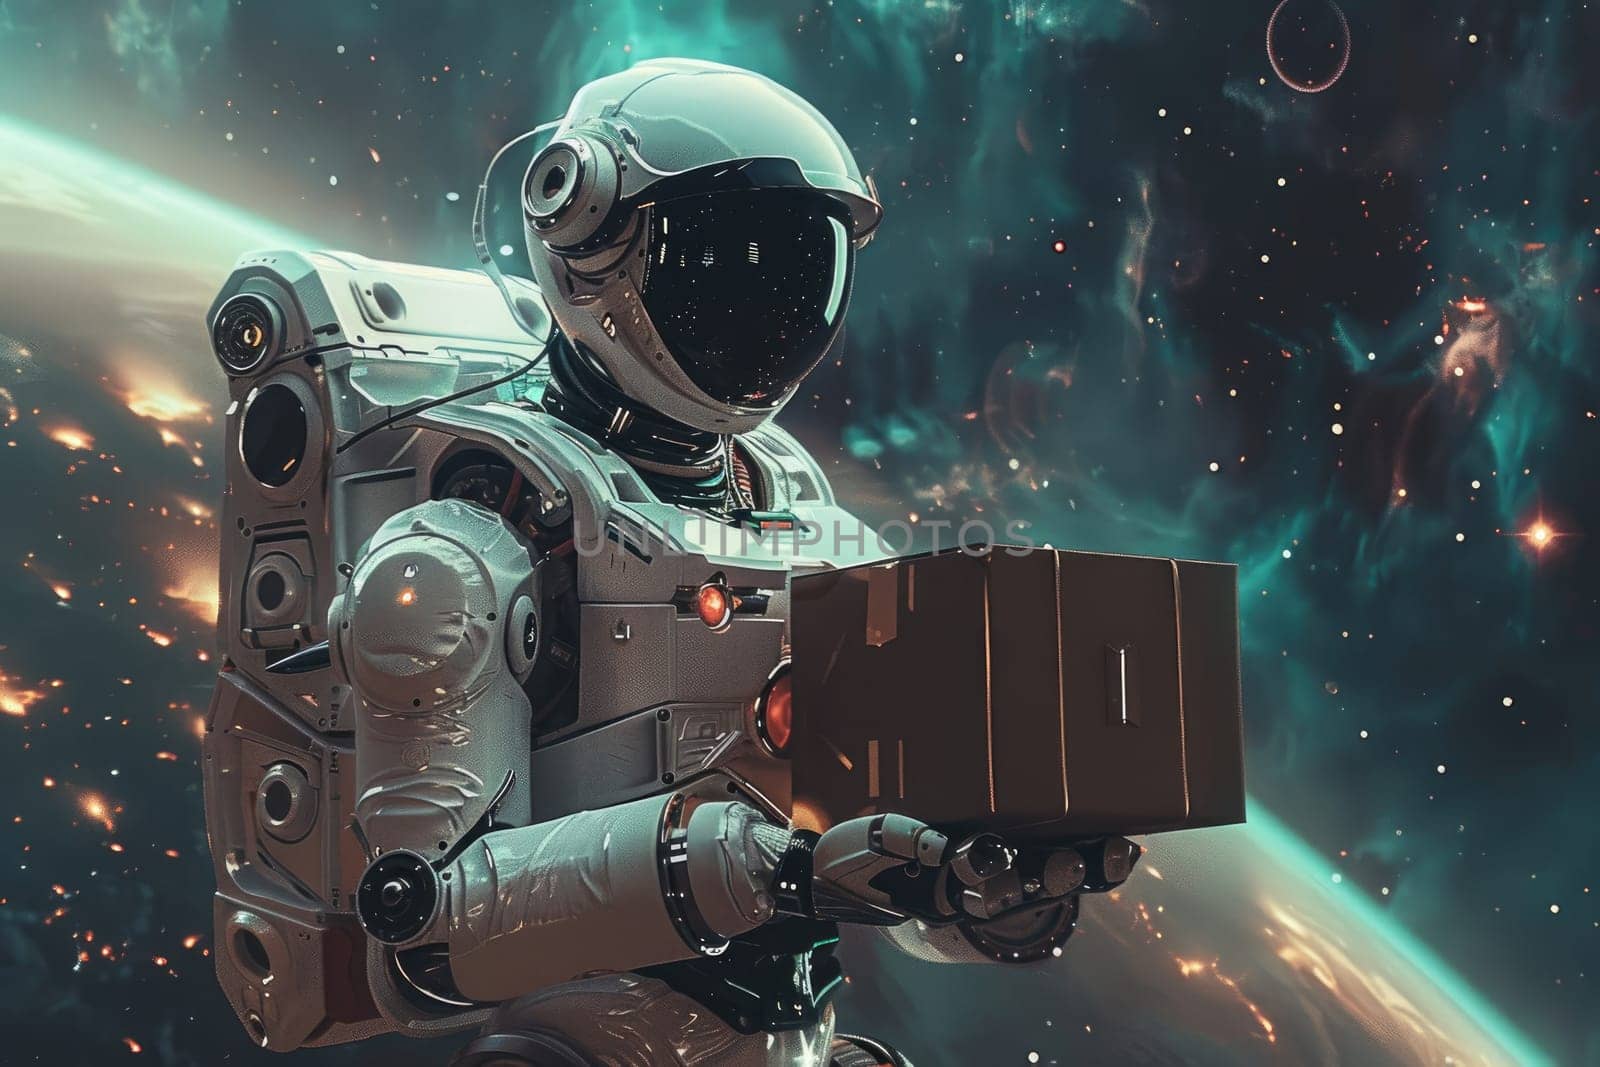 A robot delivering a package in the middle of space with galaxy background.